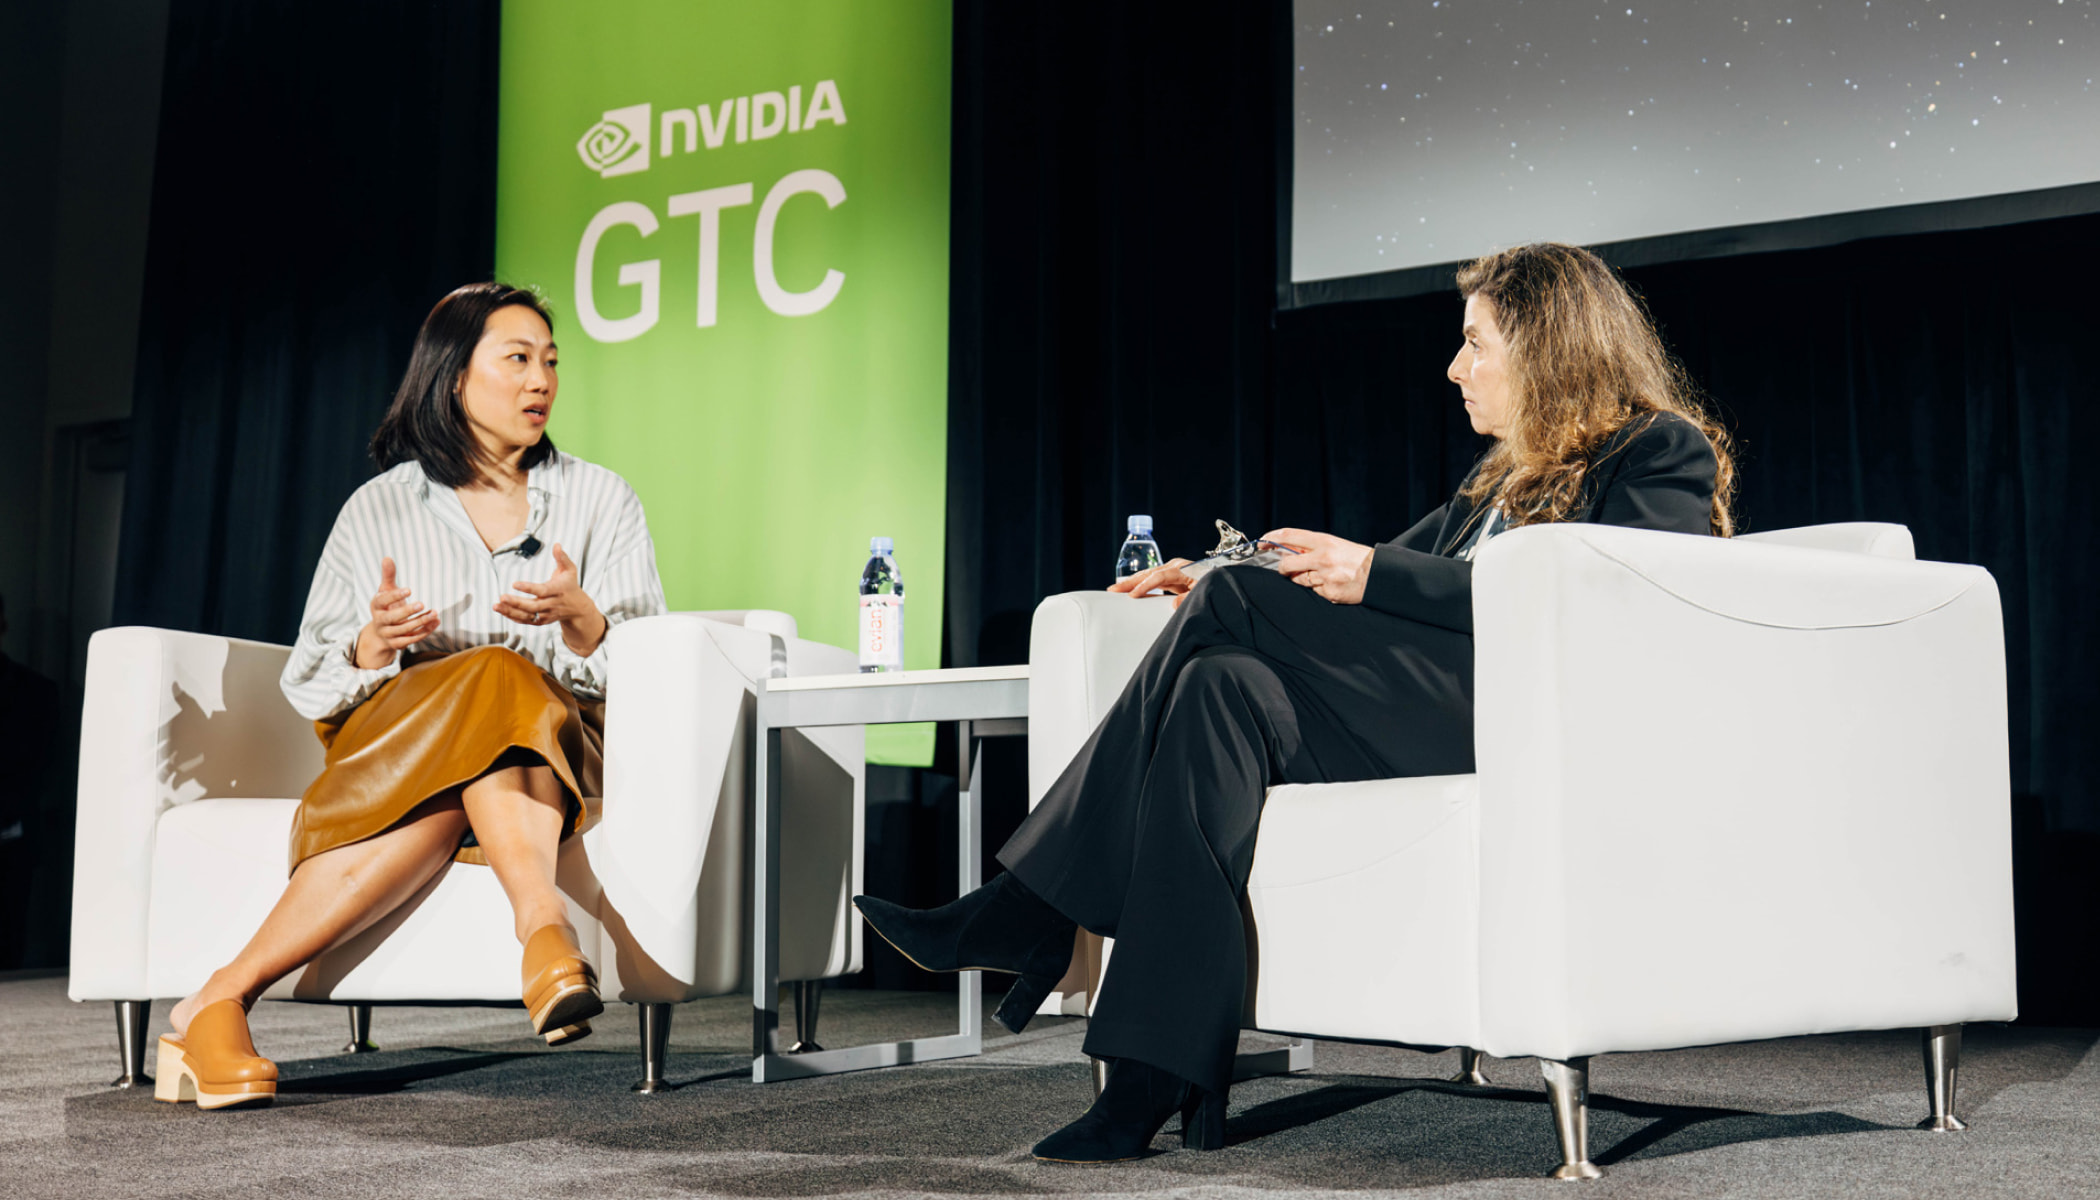 Drs. Priscilla Chan and Mona G. Flores sit in white armchairs on a stage for a fireside chat. A green banner that reads “NVIDIA GTC” hangs behind them.